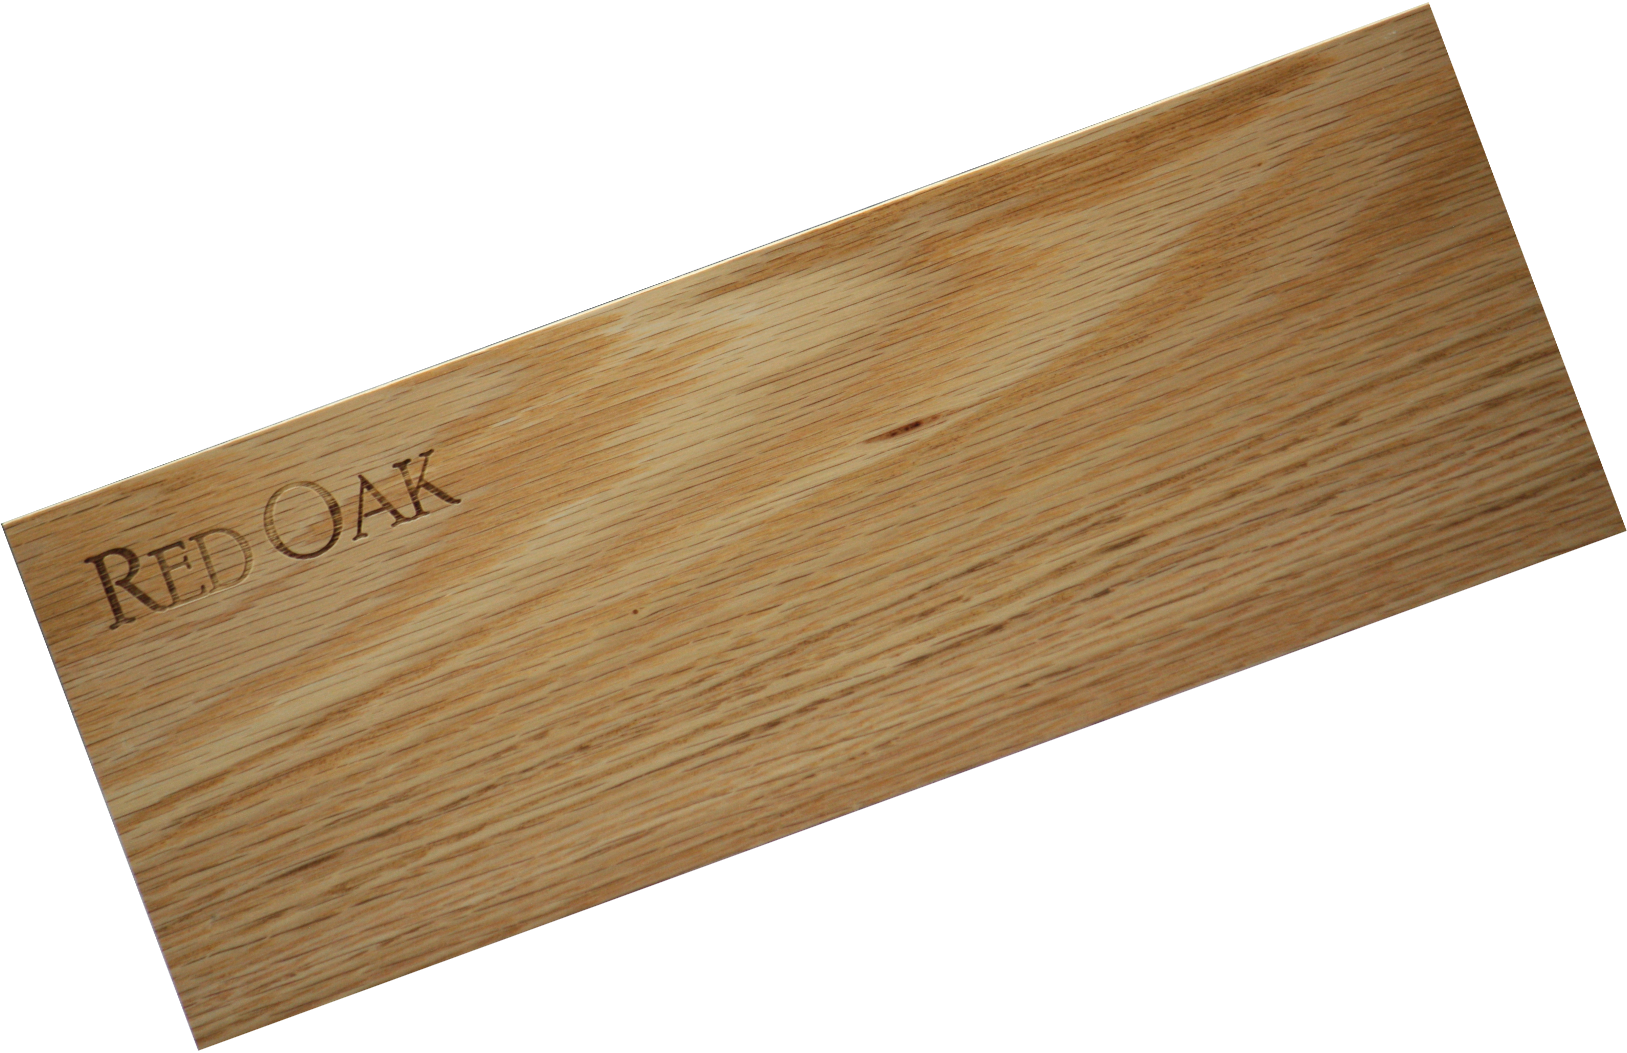 Wood Strip (Red Oak / Hickory) 12" x 24" x  (1/16", 3/32", 1/8", 3/16" or 1/4") 